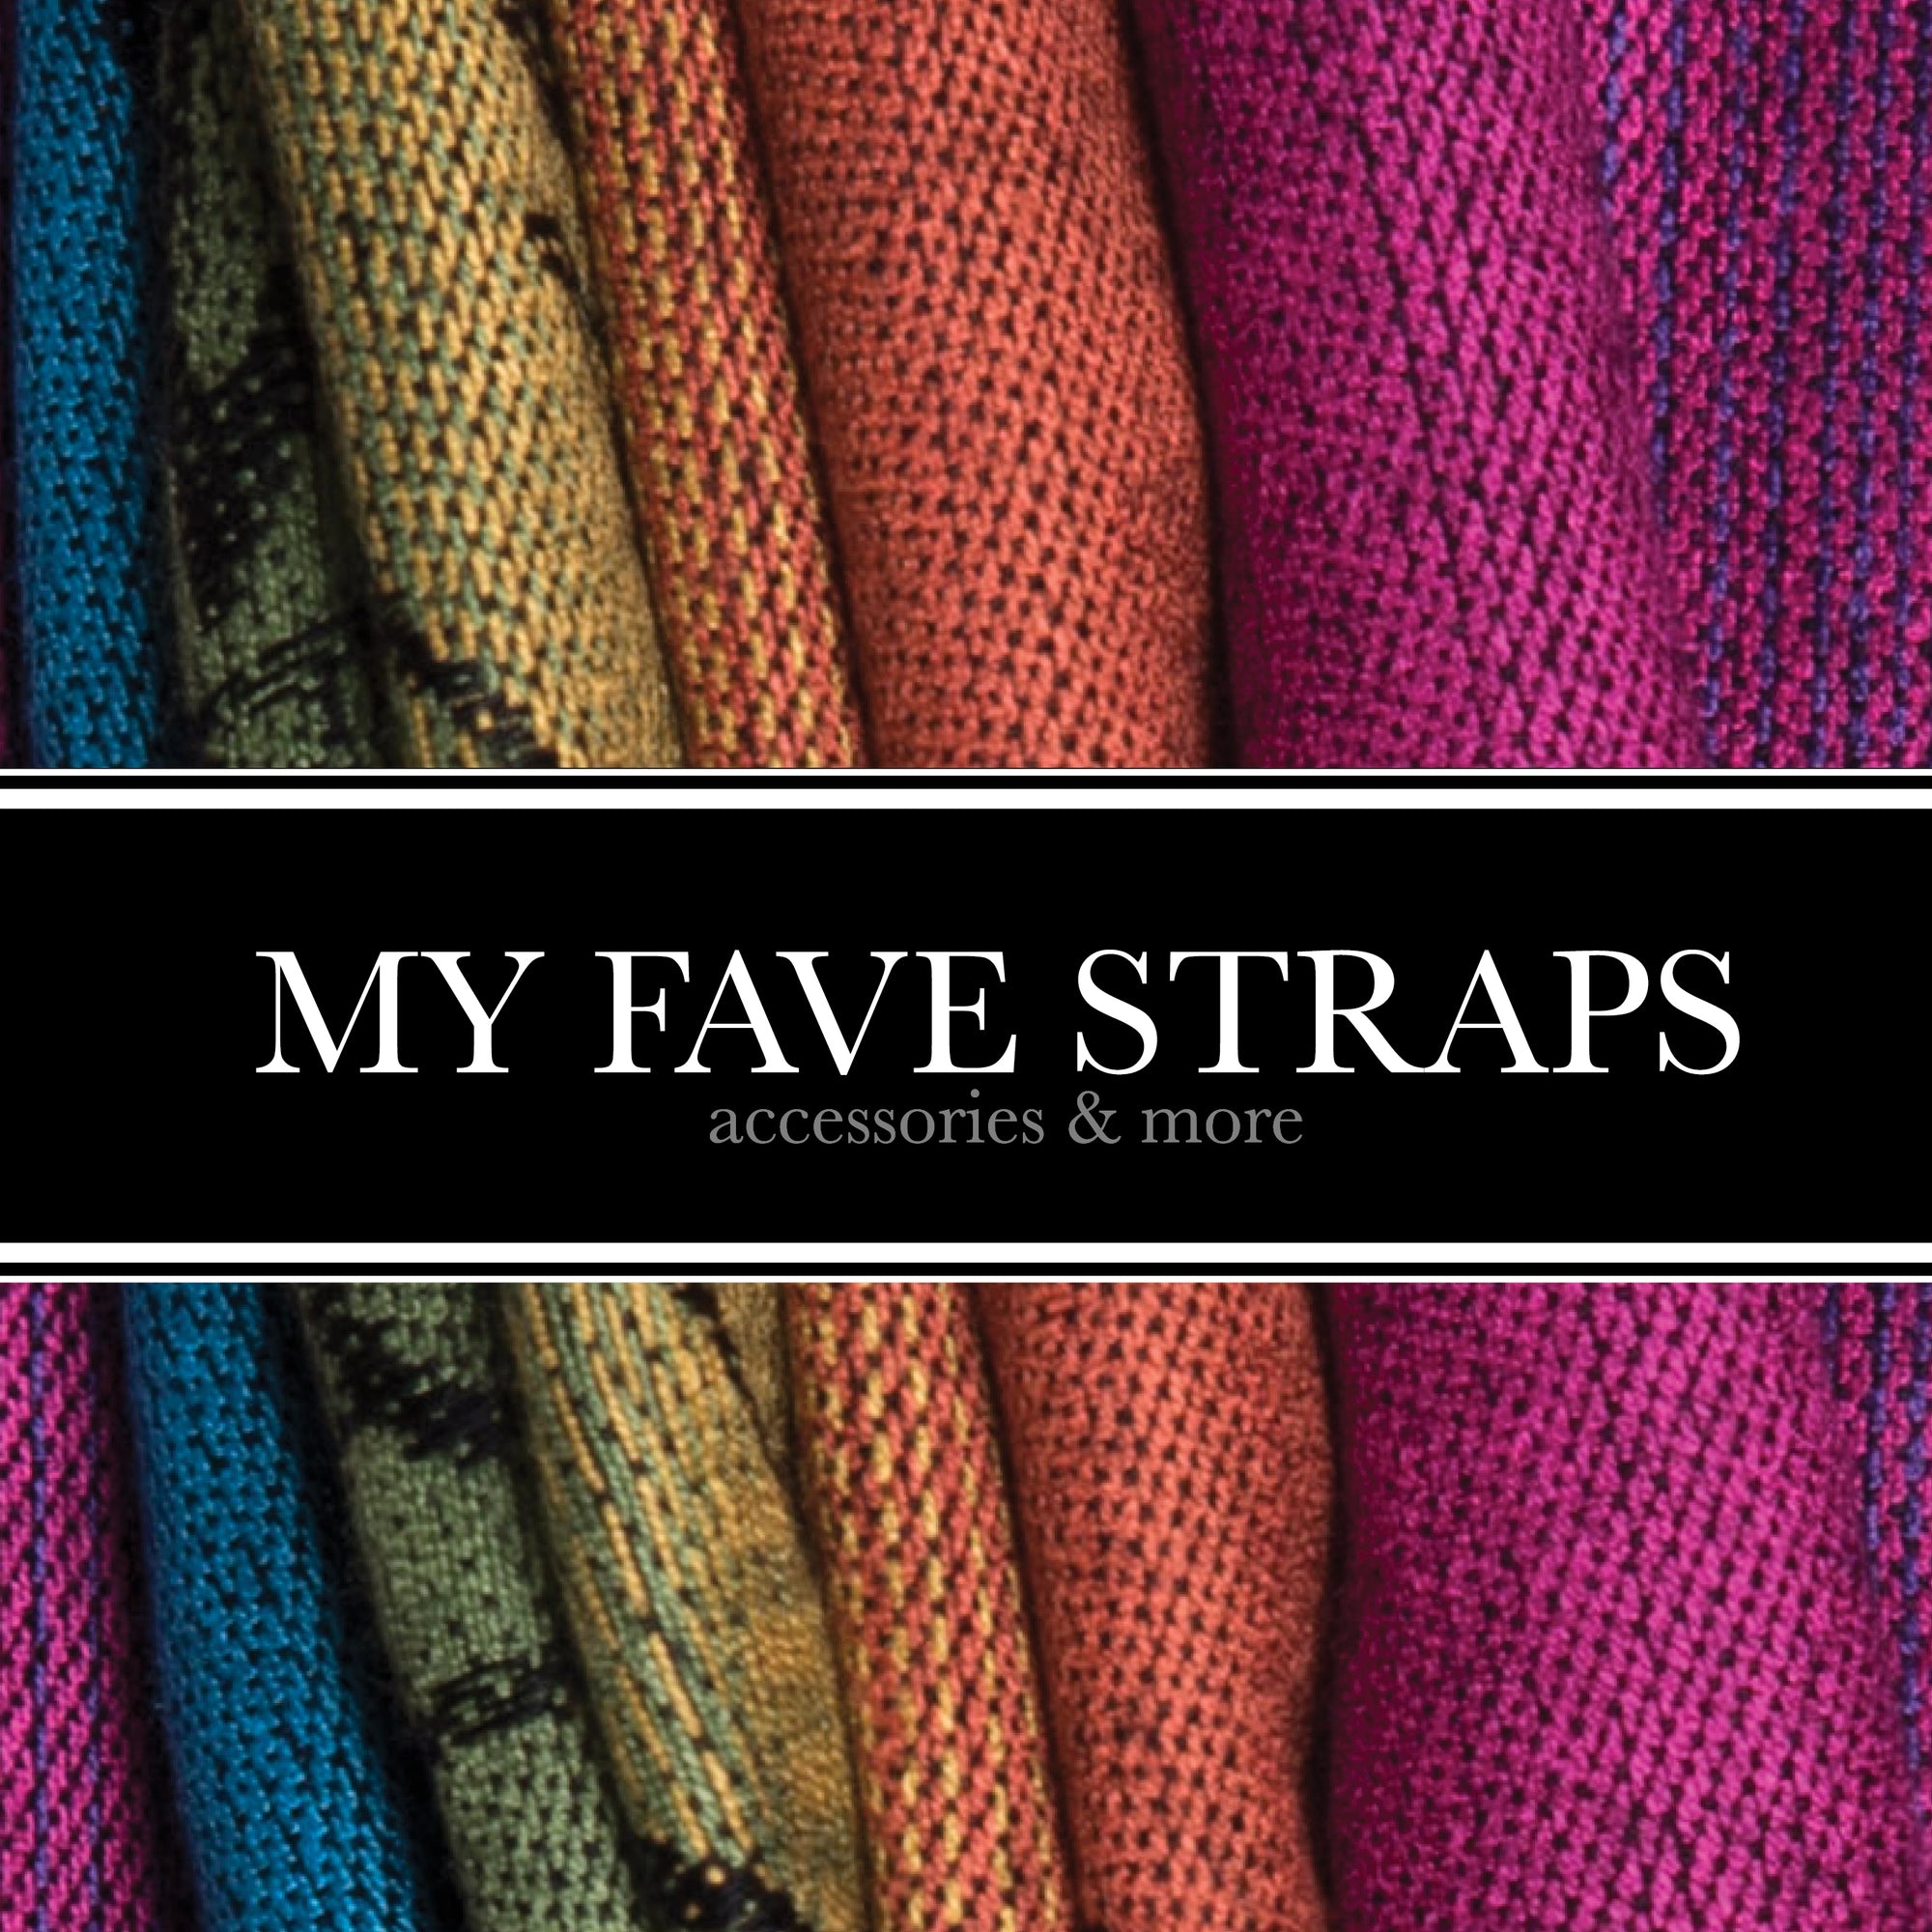 My Fave Straps sells fashionable and functional straps for life's adventures and interests